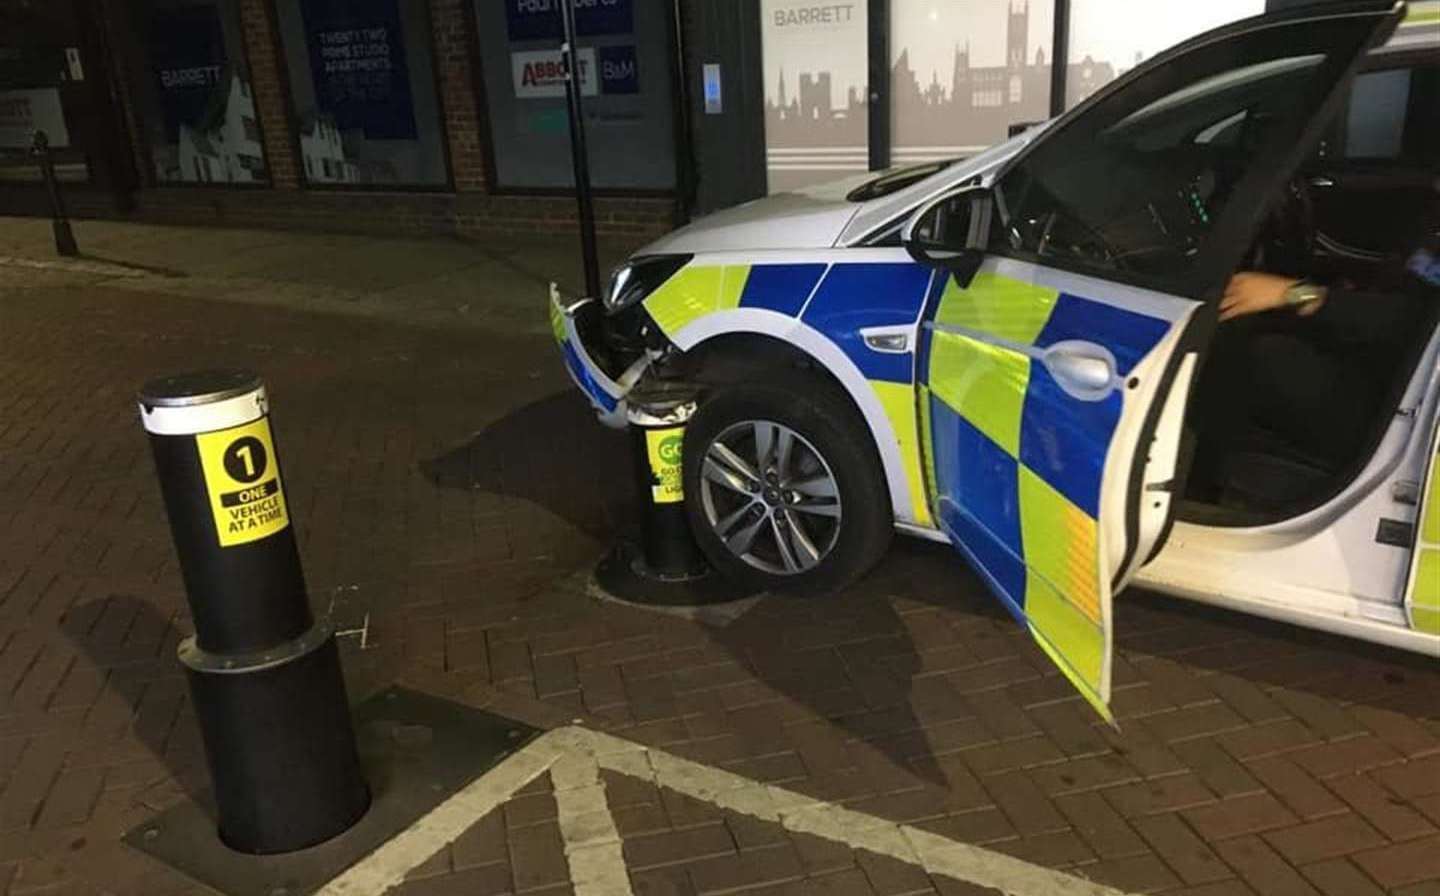 A police car suffered damage to its front bumper after colliding with a bollard in St Peter's Street, Canterbury. Picture: Howard Sanders